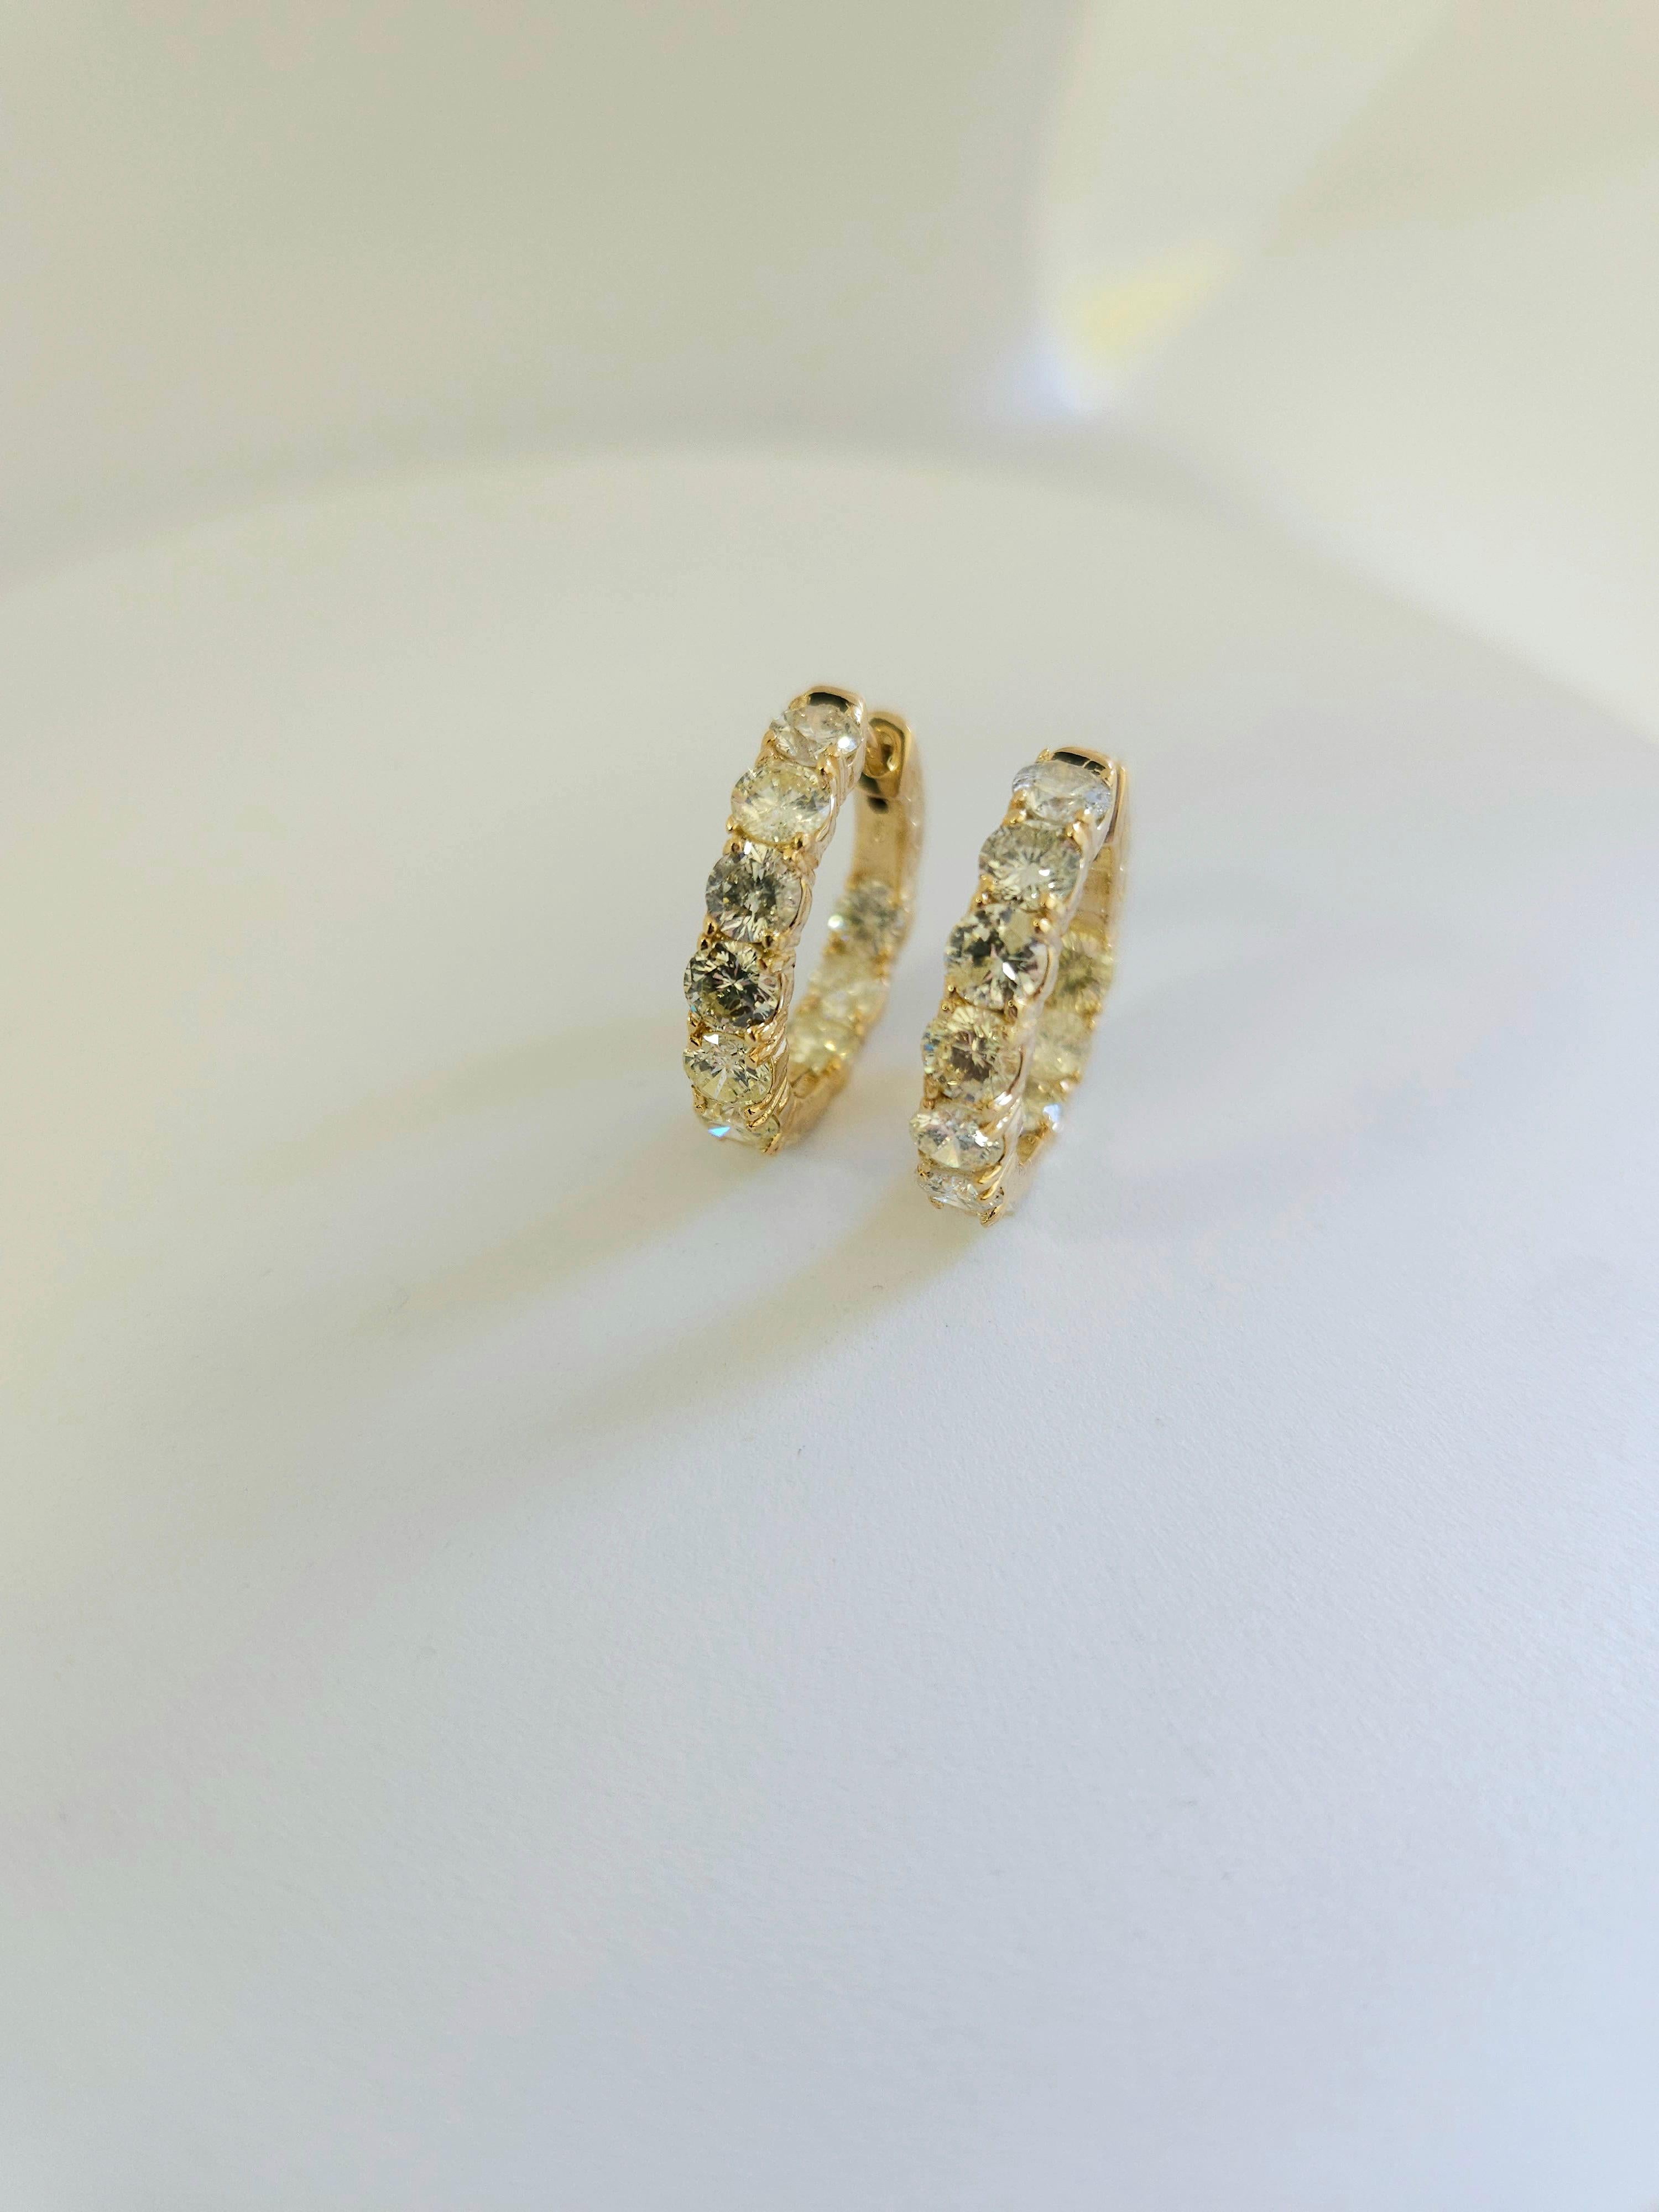 Beautiful pair of diamond Huggie hoop earrings in 14k yellow gold. 
Secures with snap closure for wear. Elegance for every moment. Inside out style
Average Color I, Clarity SI,I 
Measures 0.75 inch diameter.  5.96 grams

*Free Shipping within U.S*